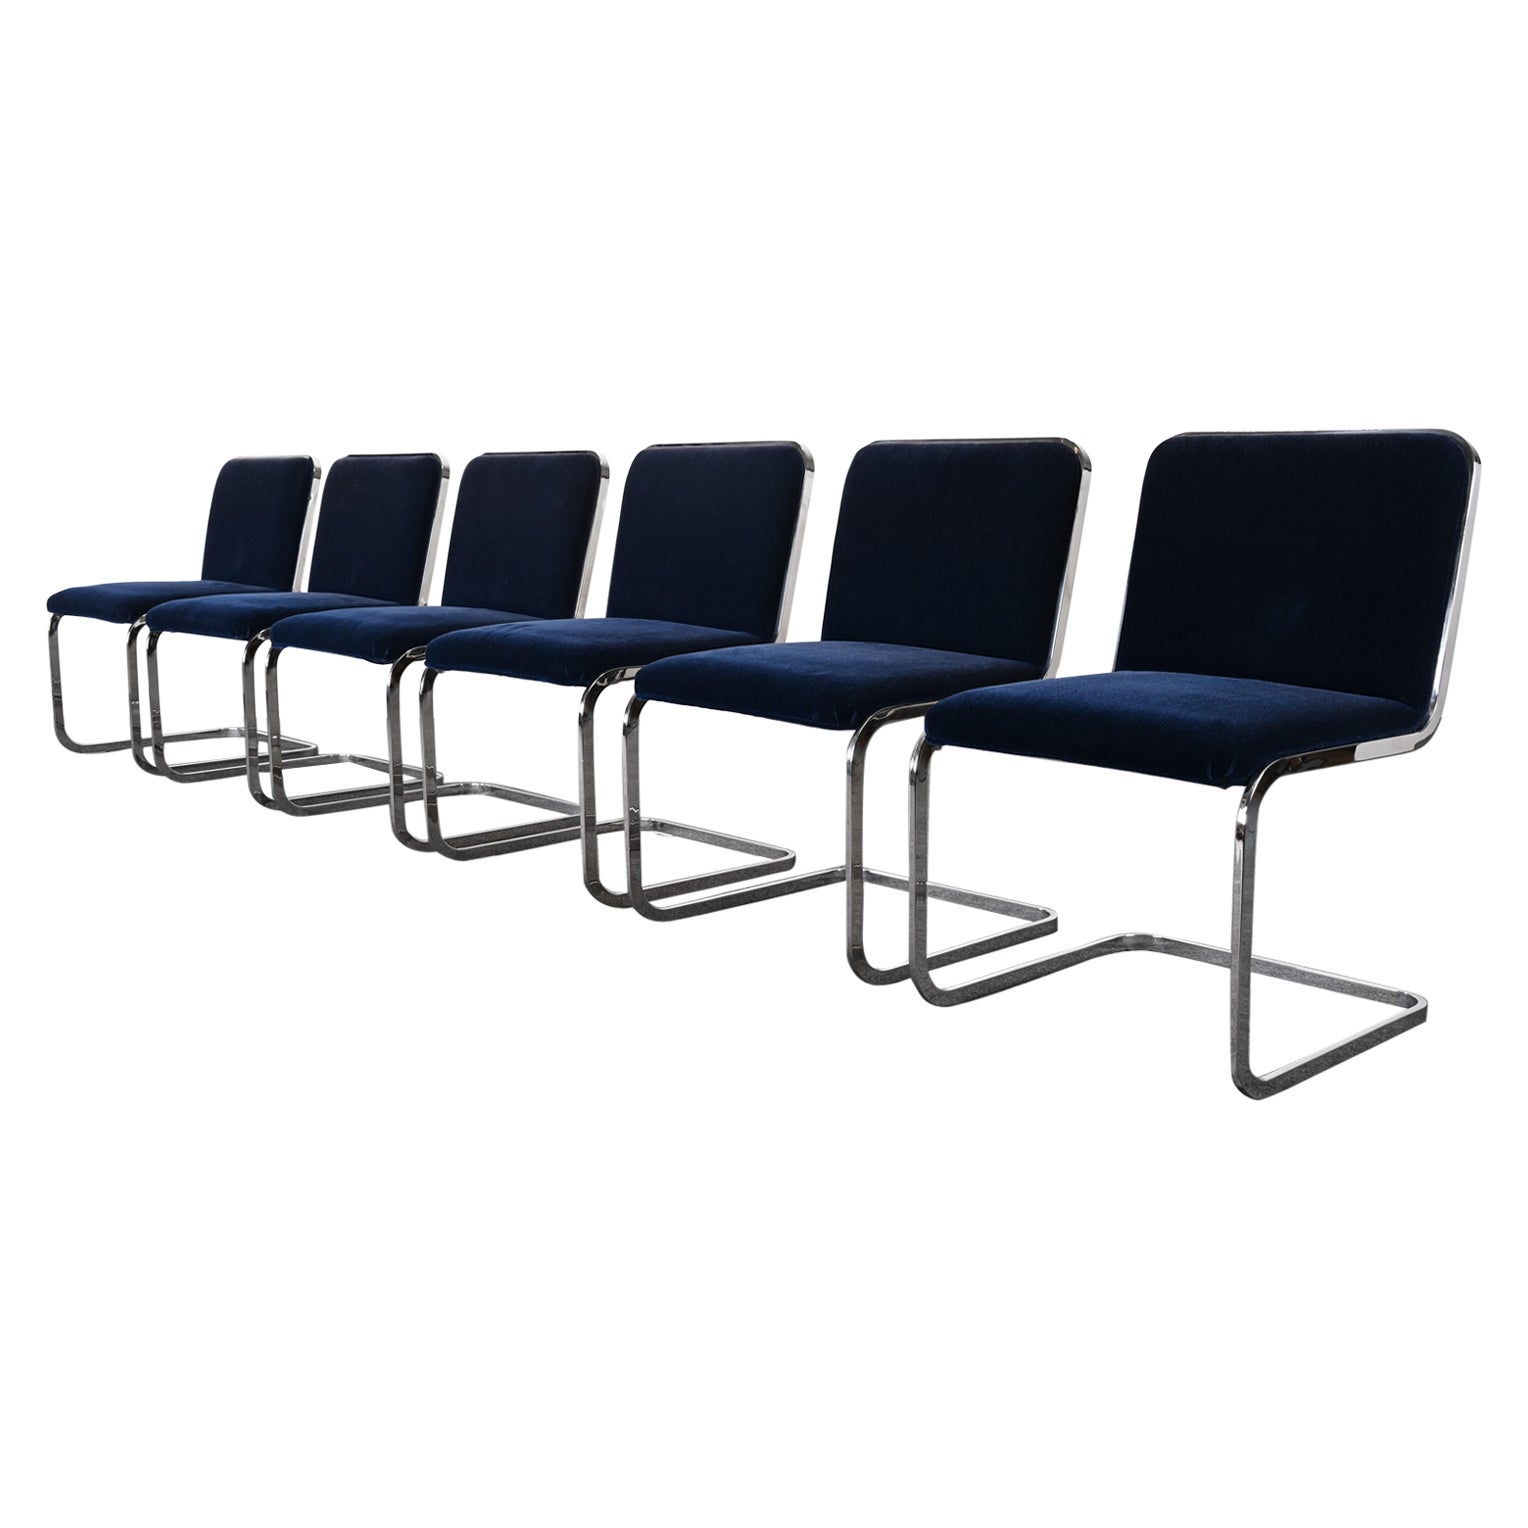 Set of Six Stainless Steel Cantilever Dining Chairs by Brueton, 1980s For Sale